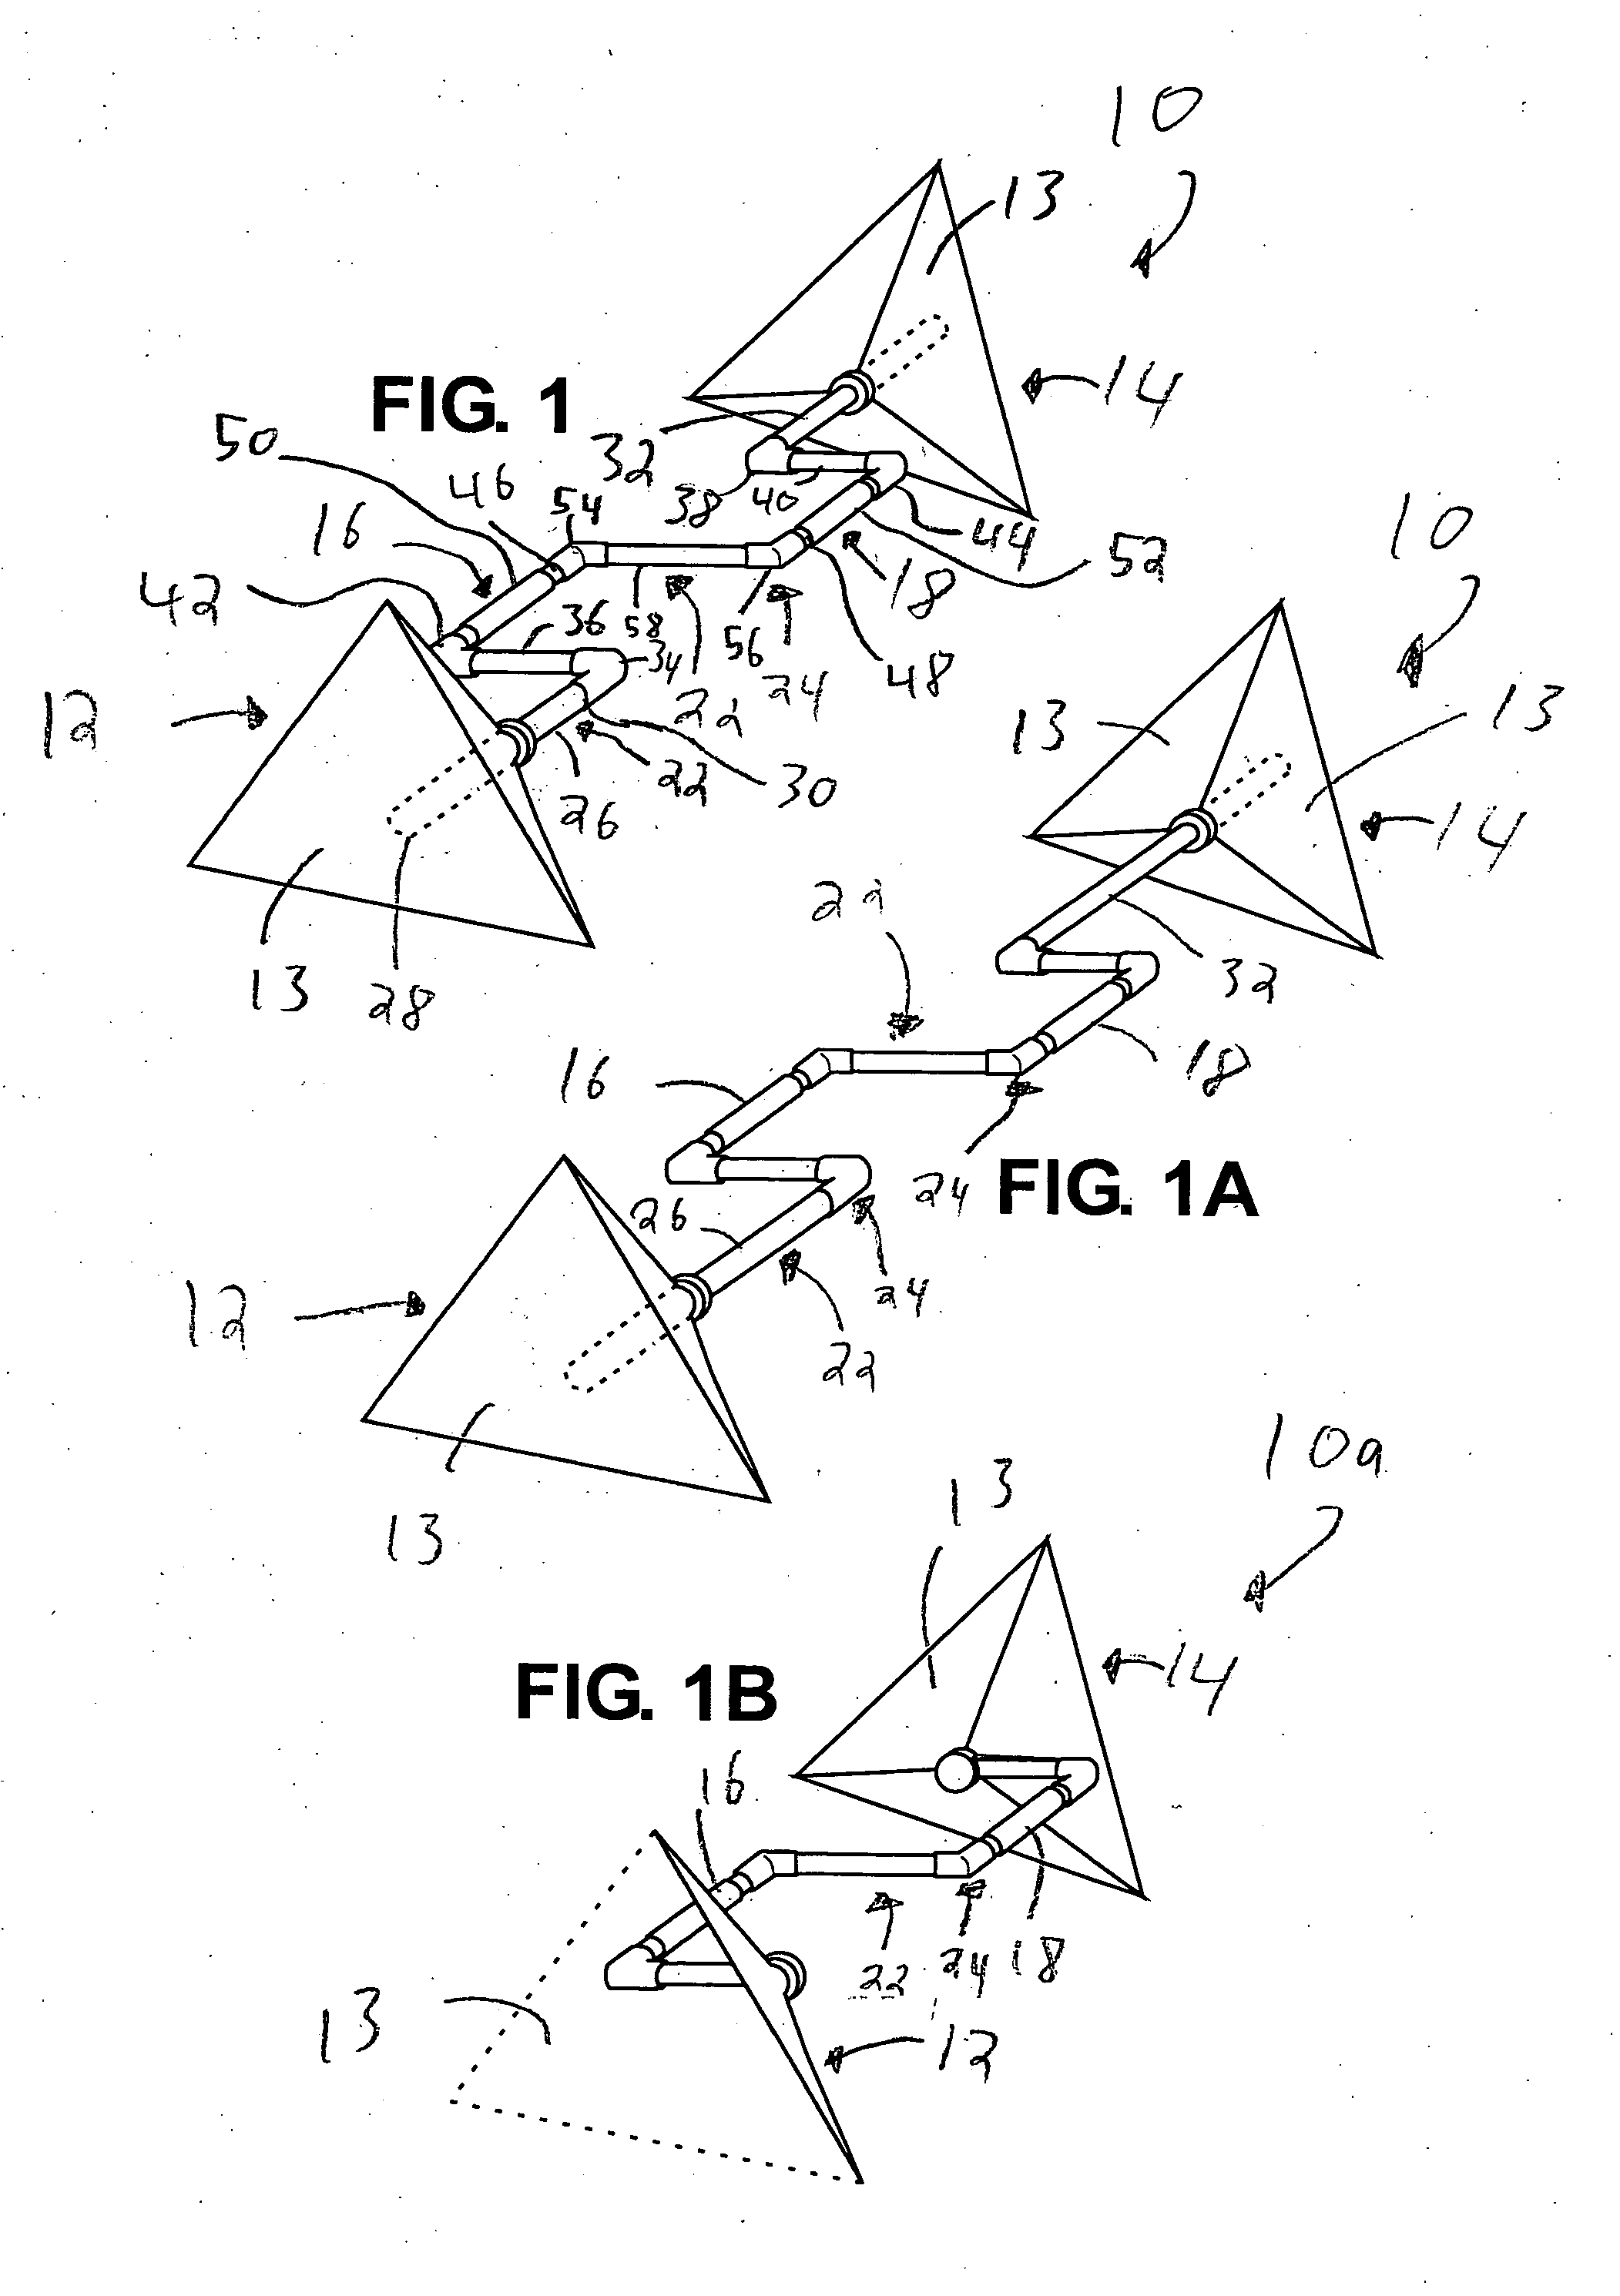 Aquatic exercise apparatus and method therefor